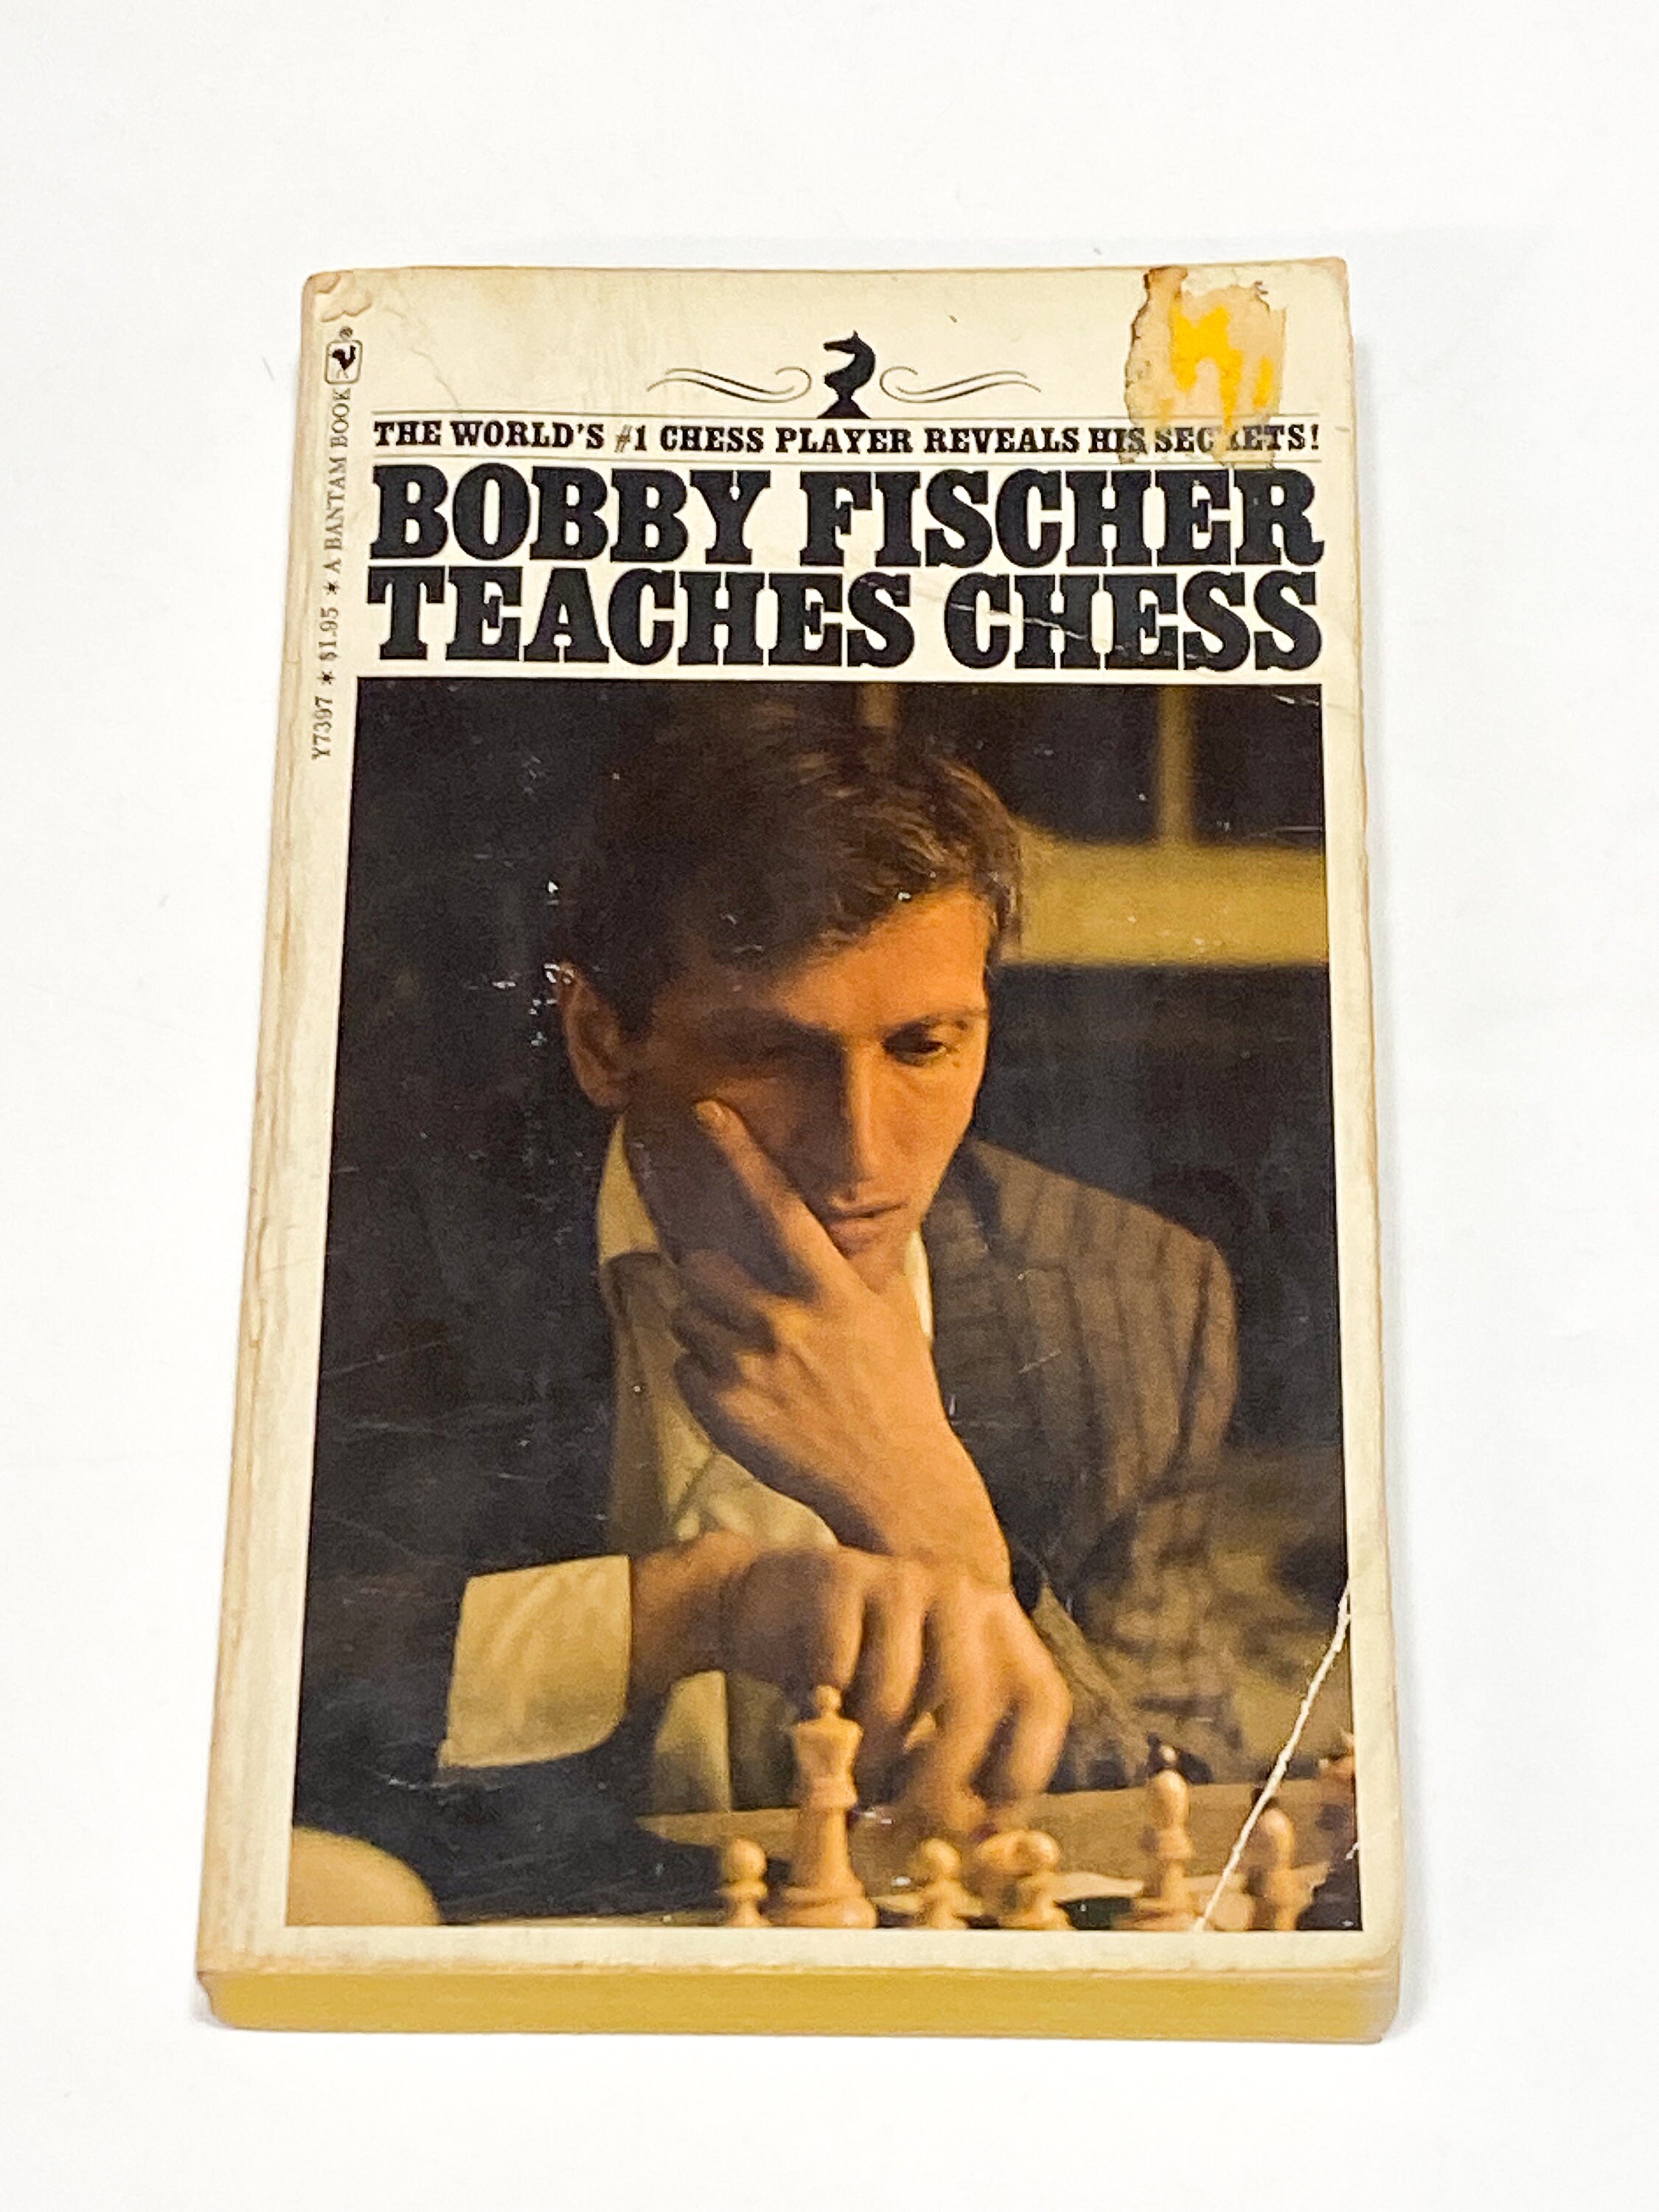 Bobby Fischers Chess Games. Edited by Robert G. Wade and 